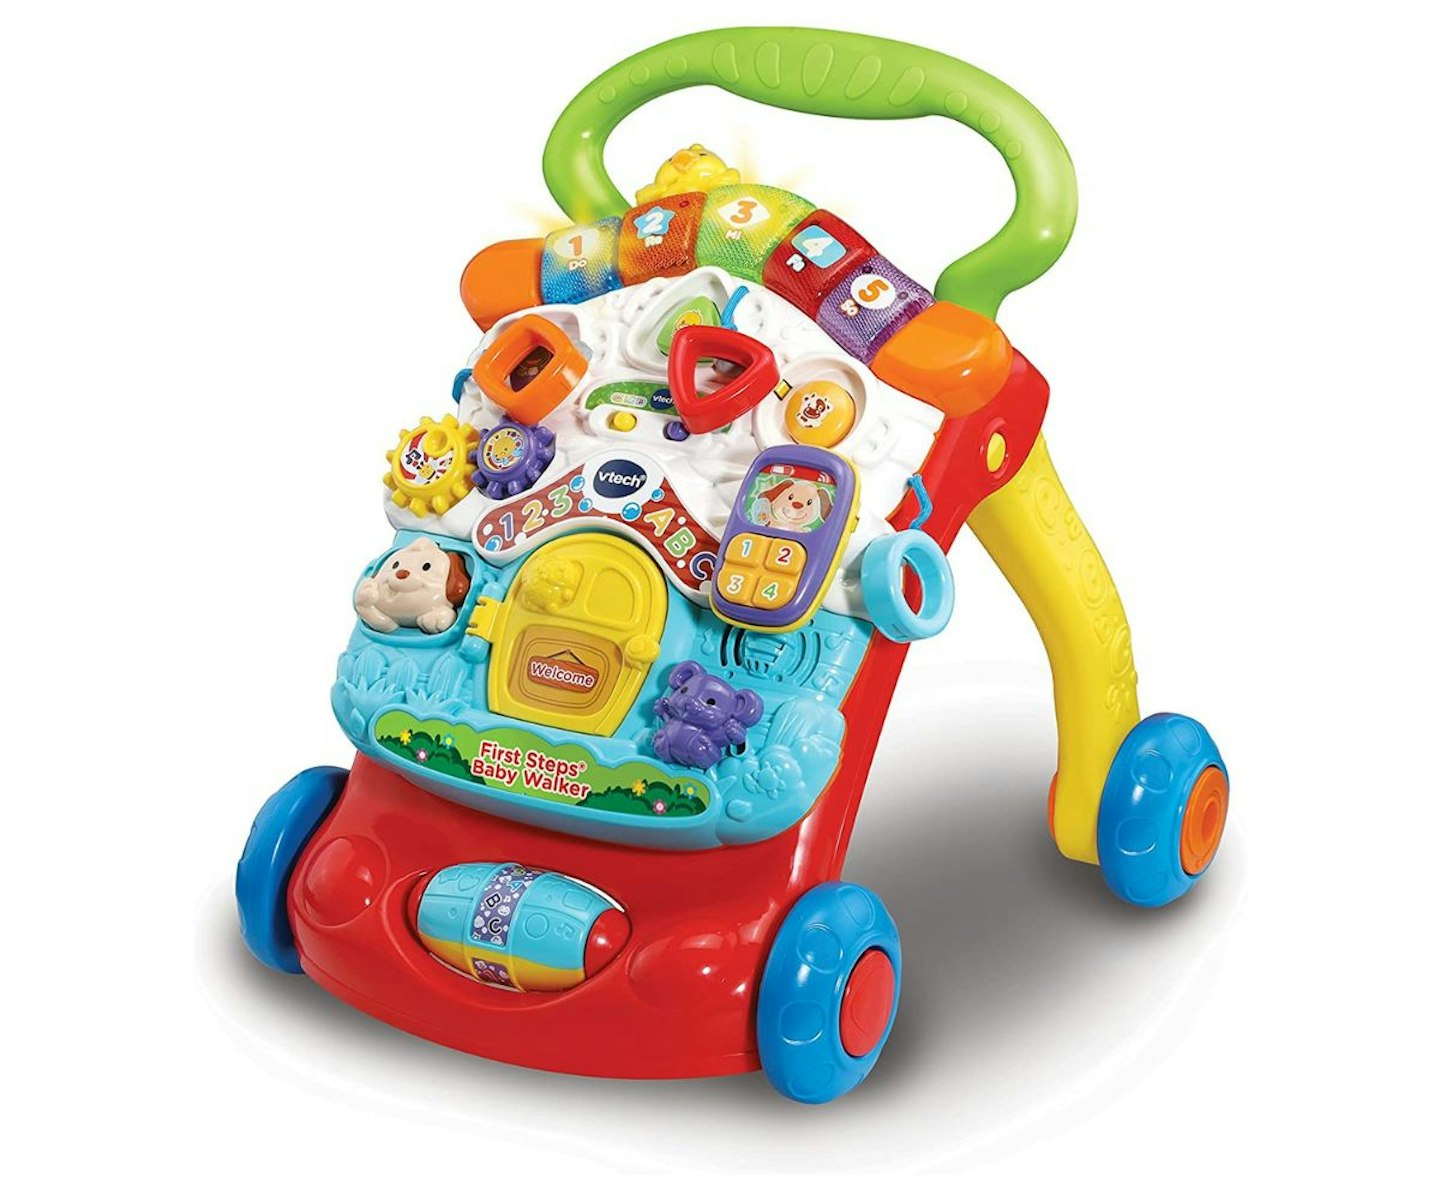 Top toys for babies aged 6 to 12 months for 2023 UK